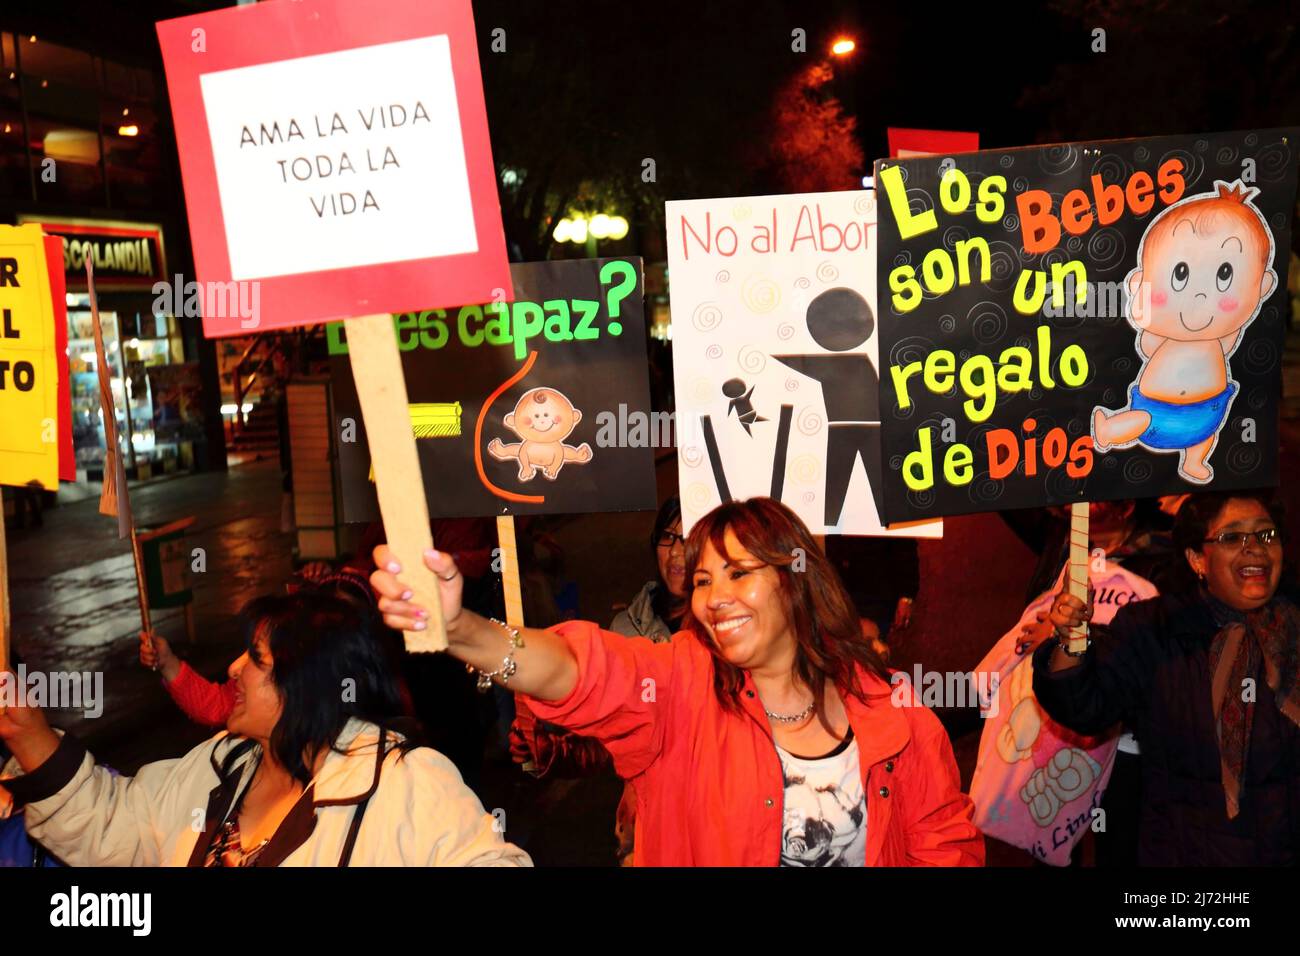 LA PAZ, BOLIVIA, 22nd August 2013. People holding placards with slogans in Spanish take part in a march organised by the Red Pro-Vida (Pro Life Network) to protest against decriminalising abortion. Bolivia has been debating whether to decriminalise abortion since March 2012. Stock Photo